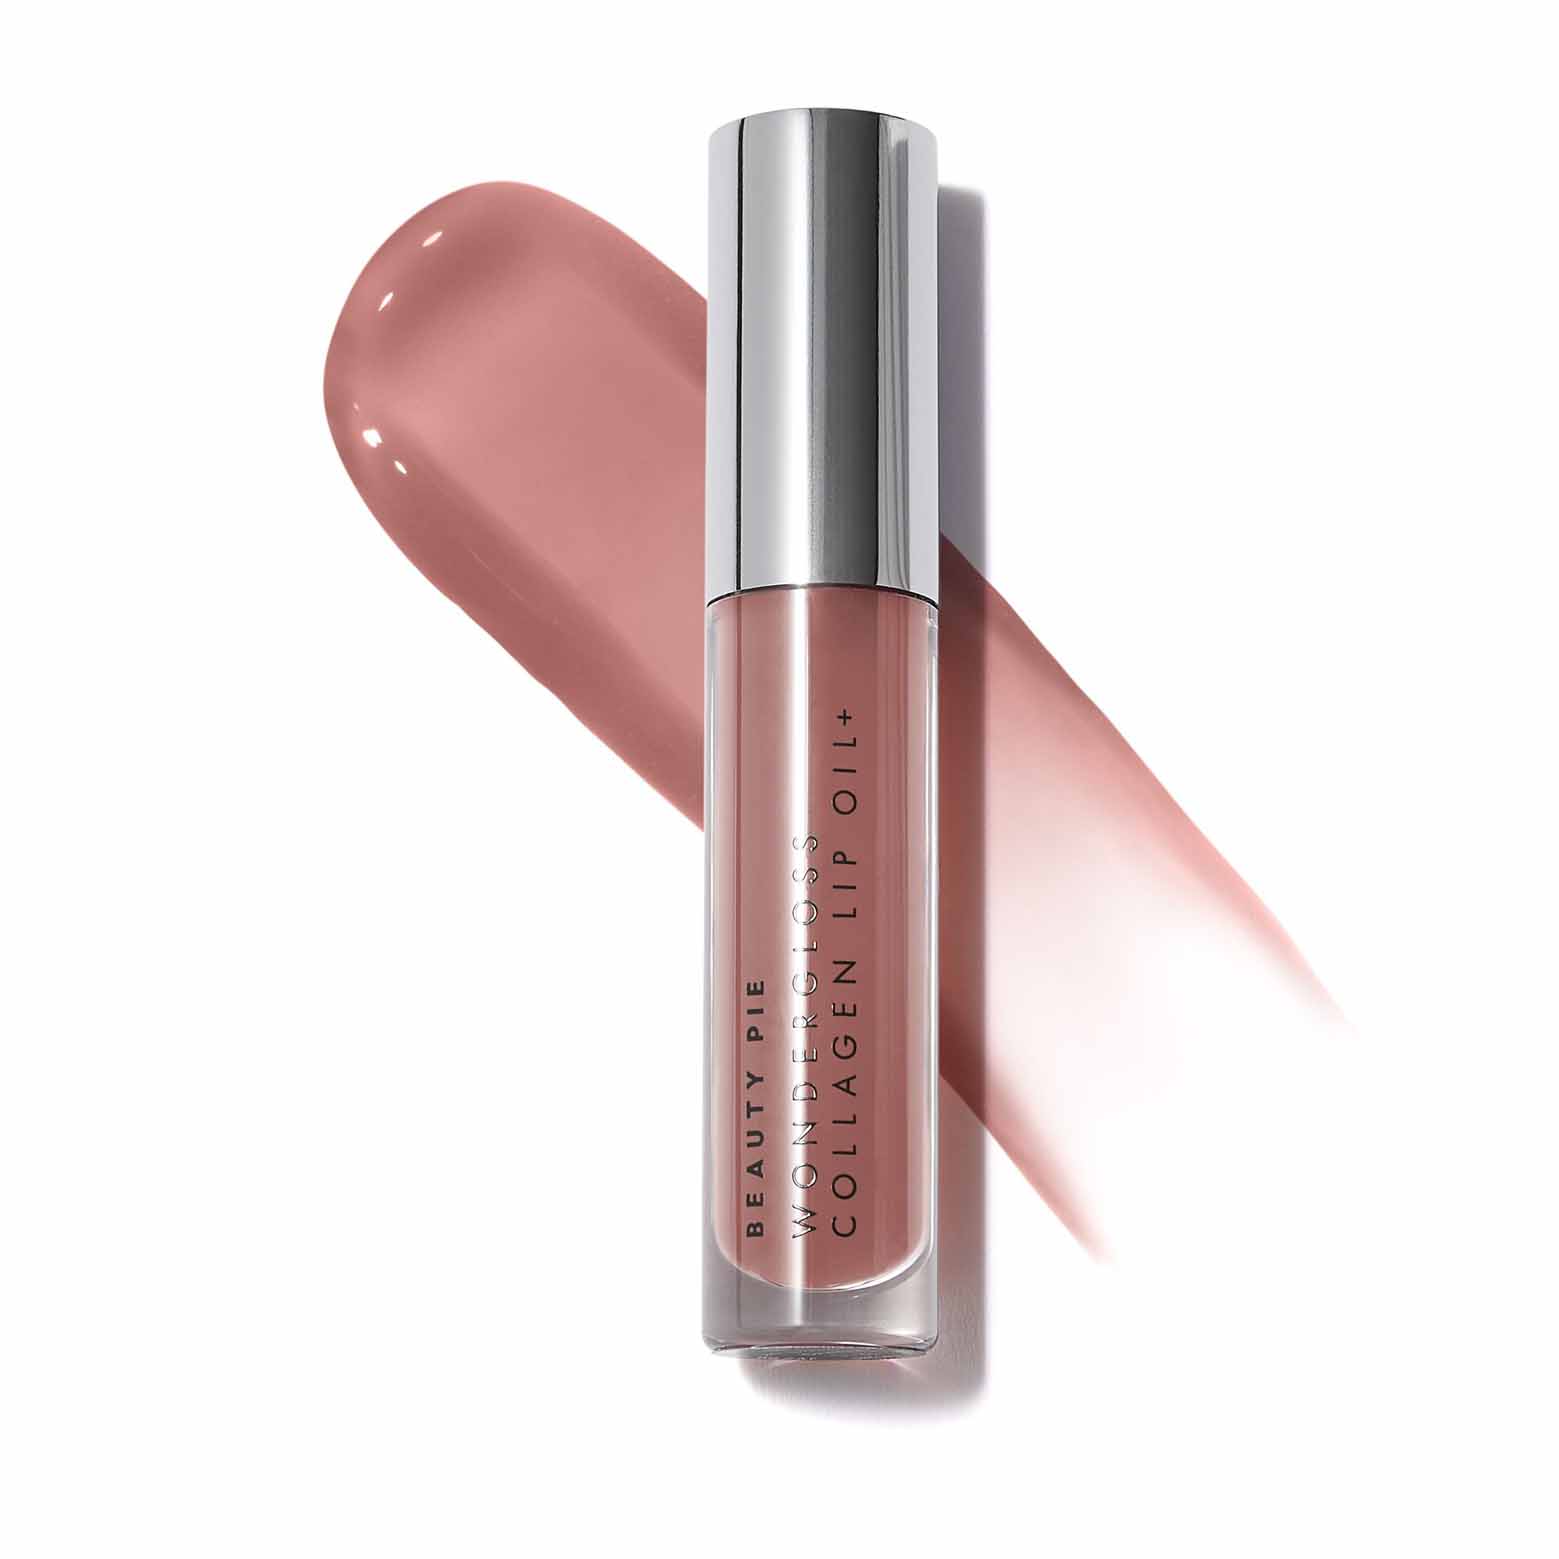 Wondergloss Collagen Lip Oil in the shade nude nectar